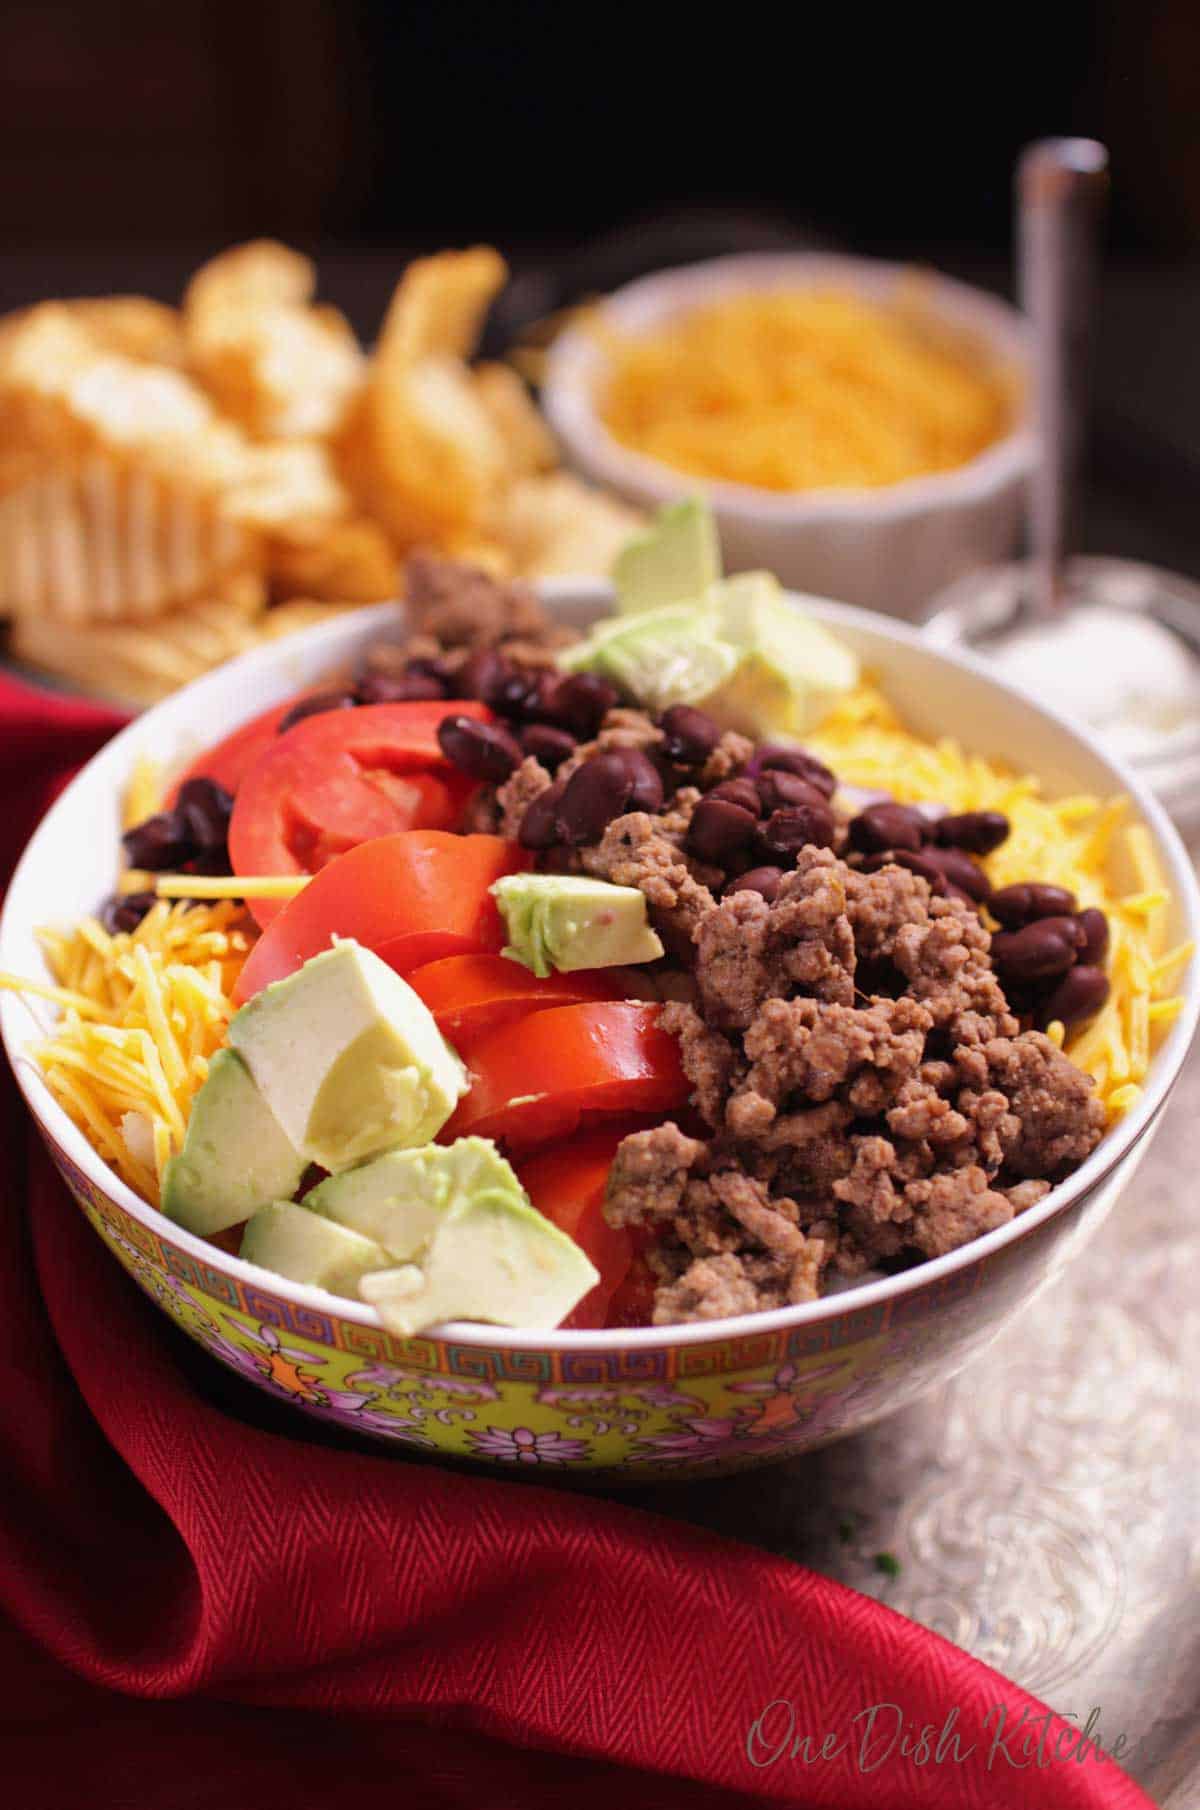 A bowl of taco salad filled with ground beef, tomatoes, avocados and cheese next to a bowl of chips.